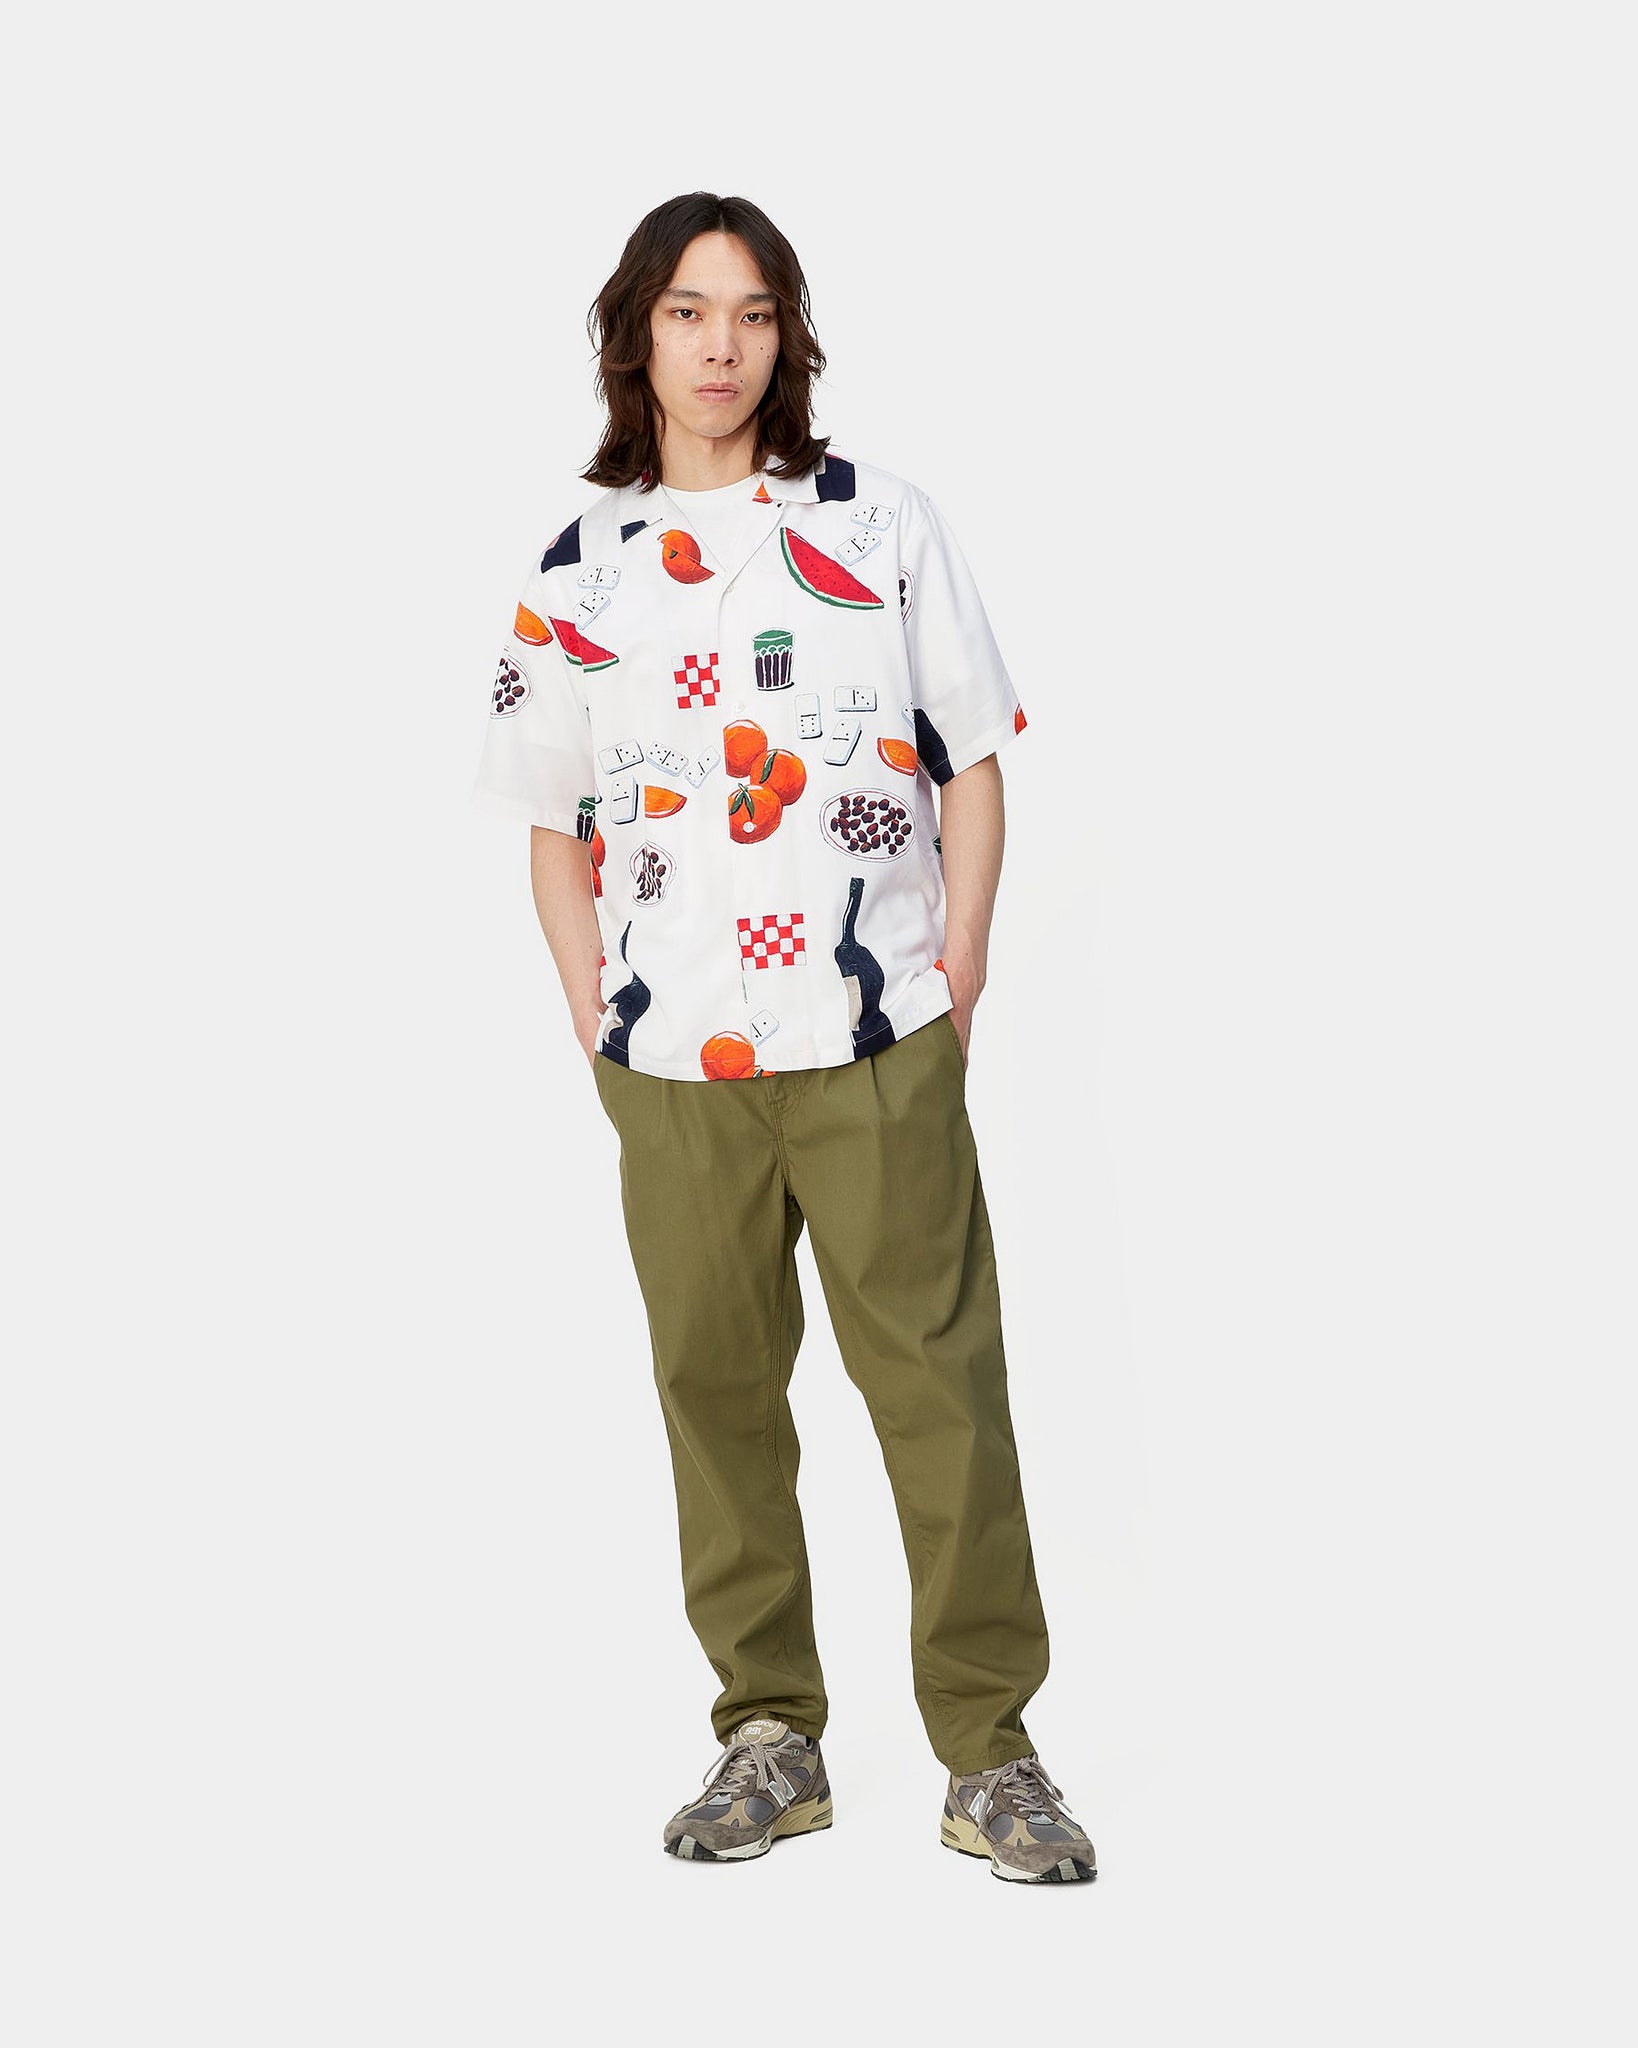 SS Isis Maria Dinner Shirt - Isis Maria Dinner AOP White